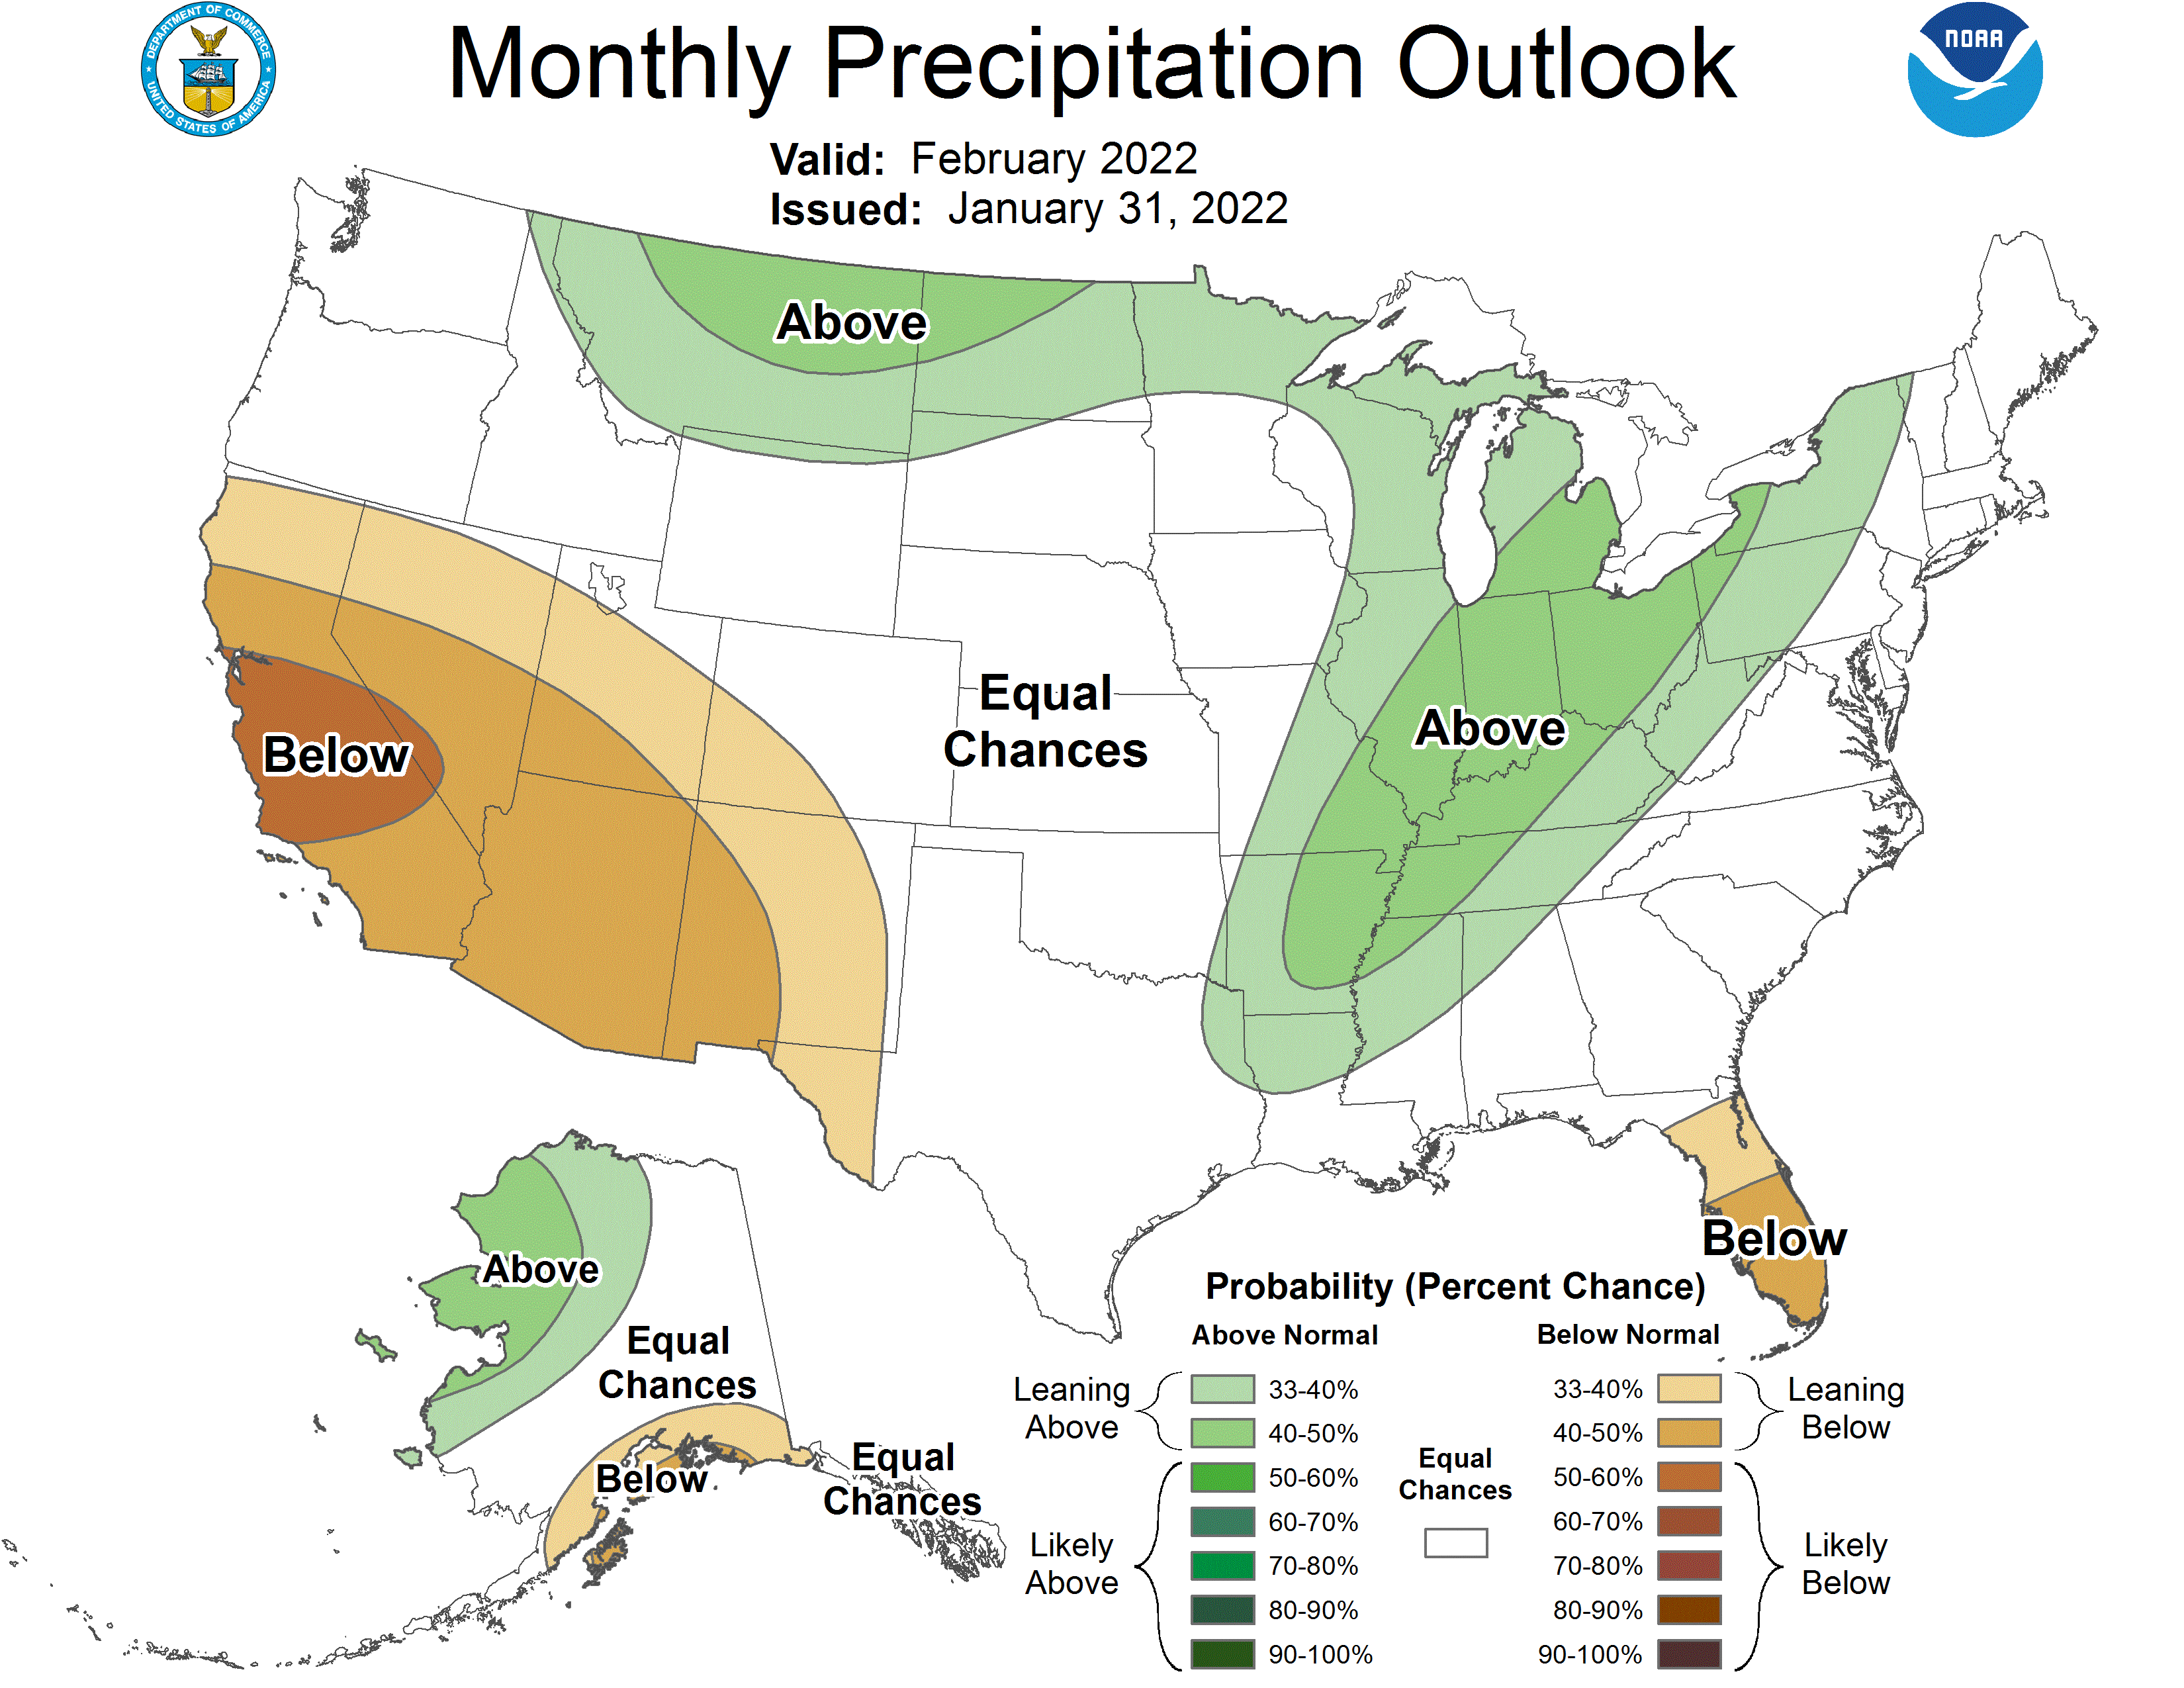 NWS Winter Outlook: Wisconsin favored to be colder, wetter than average